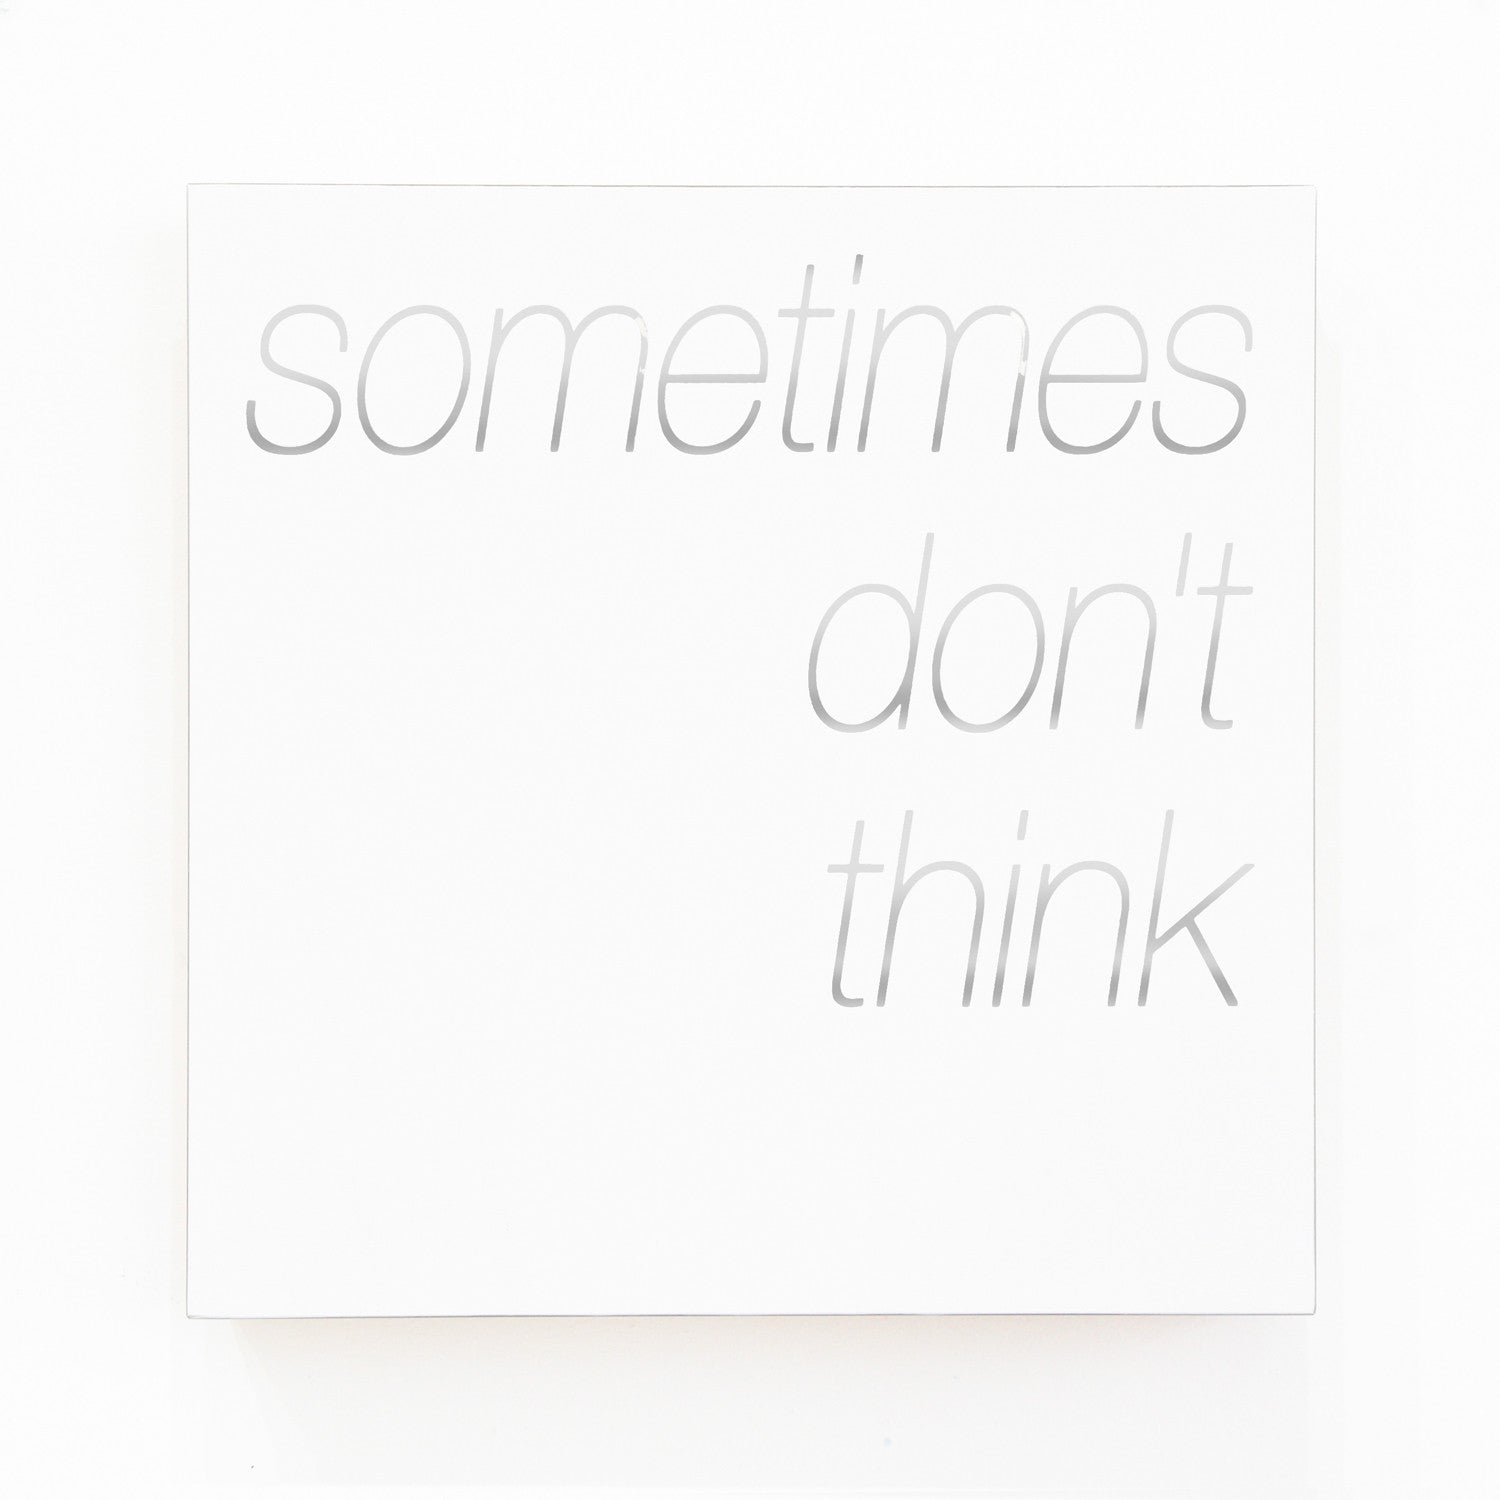 Blair Chivers, "Sometimes Don't Think"